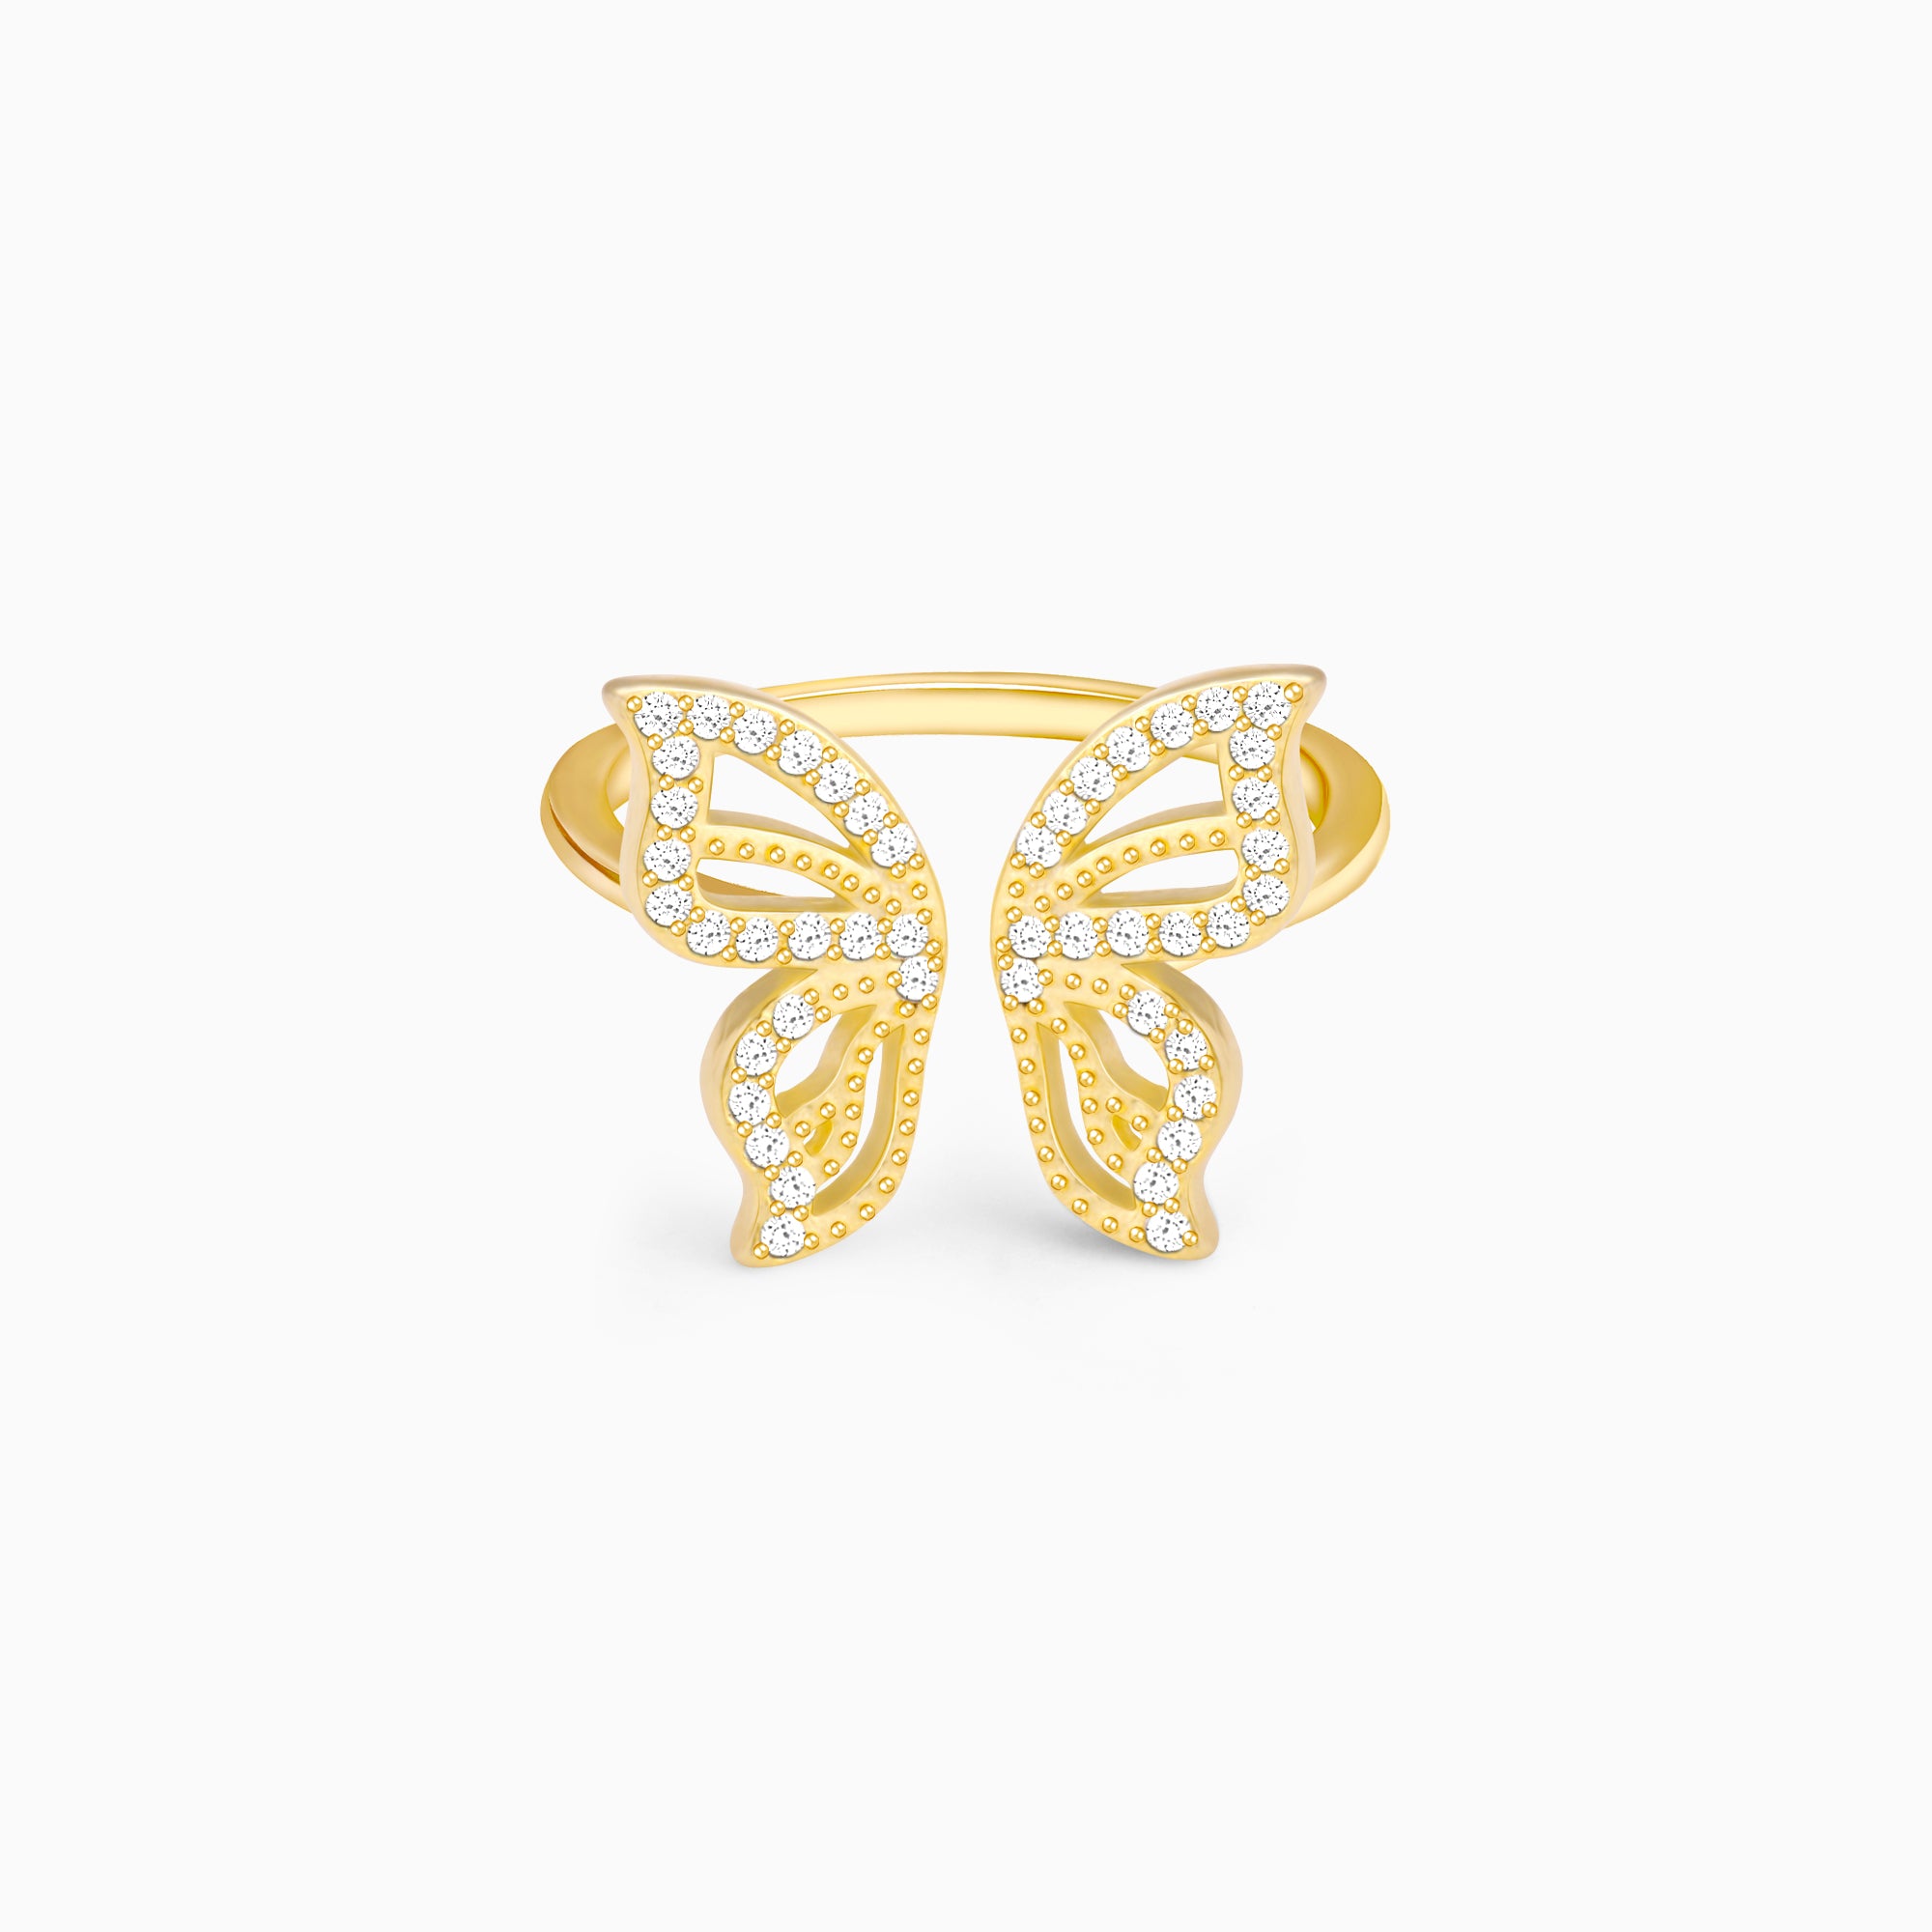 Deconstructed Butterfly Ring | Radiant Bay